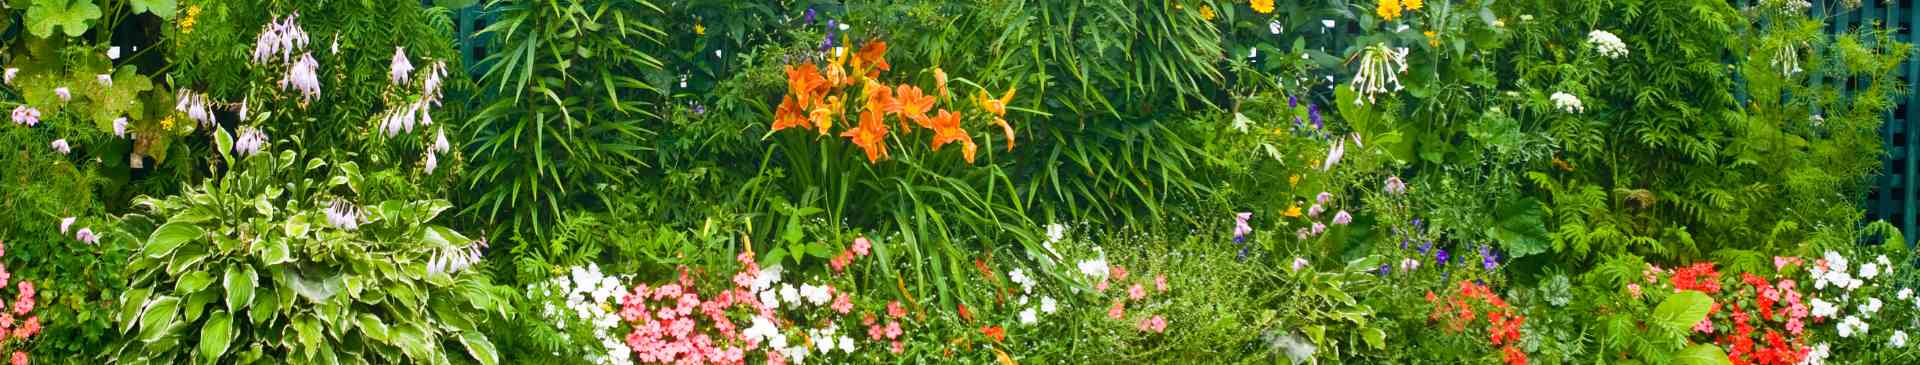 Cottage Gardens: Design and Planting Tips to Fill Your Garden with Colour